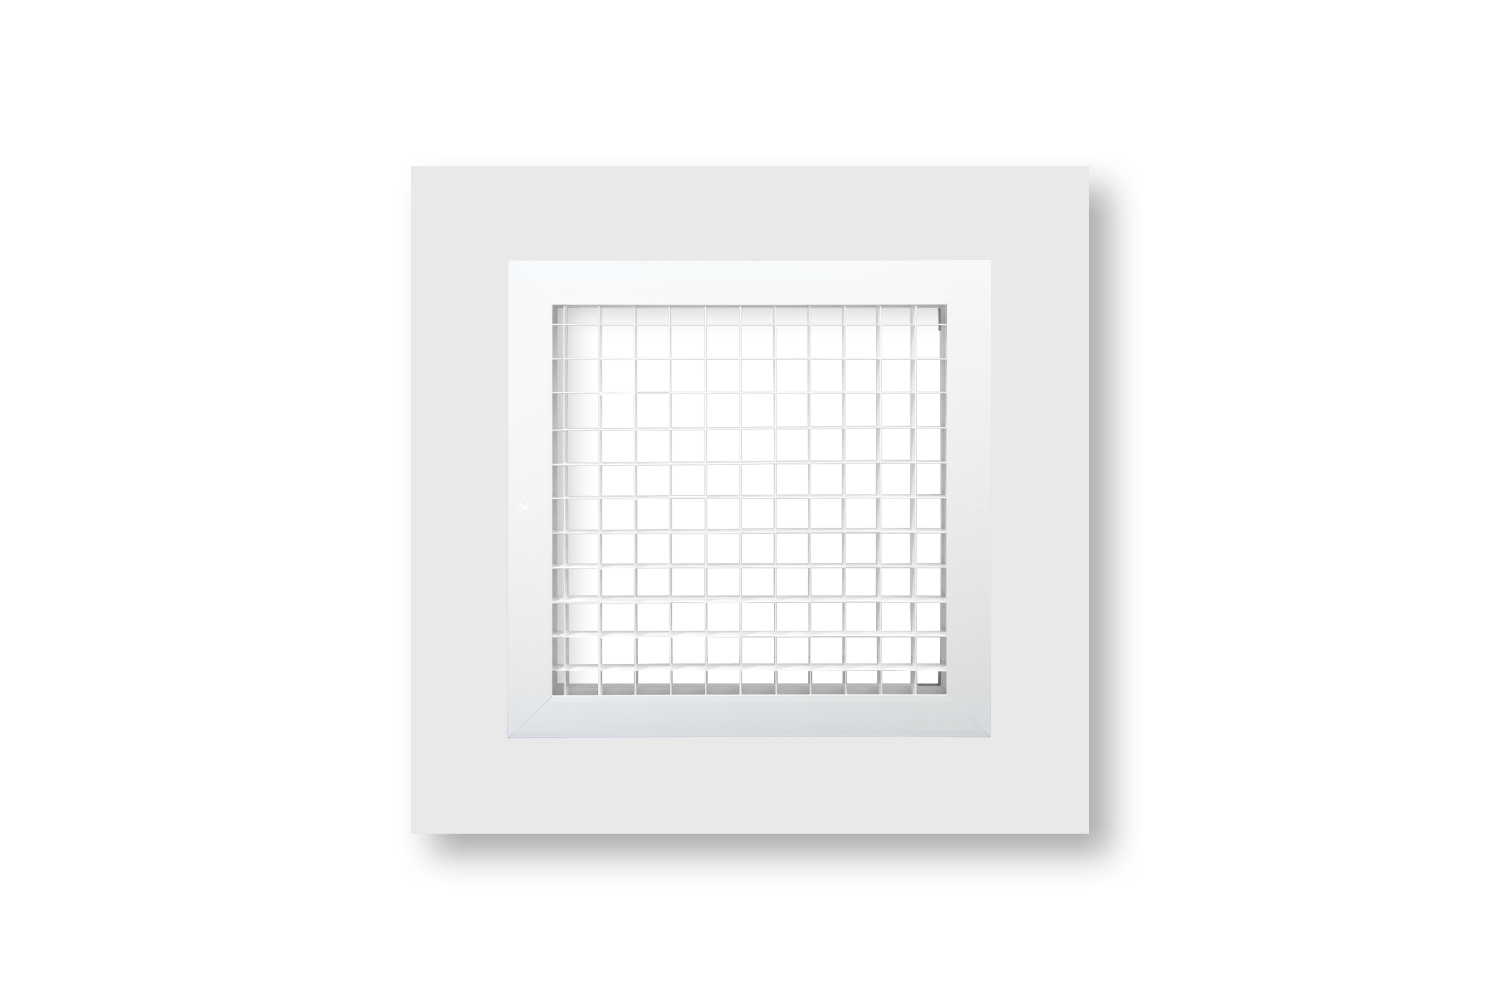 Dayus PNL 2' x 2' Aluminum Panel for Lay-In Ceiling HVAC Grille Registers thumbnail